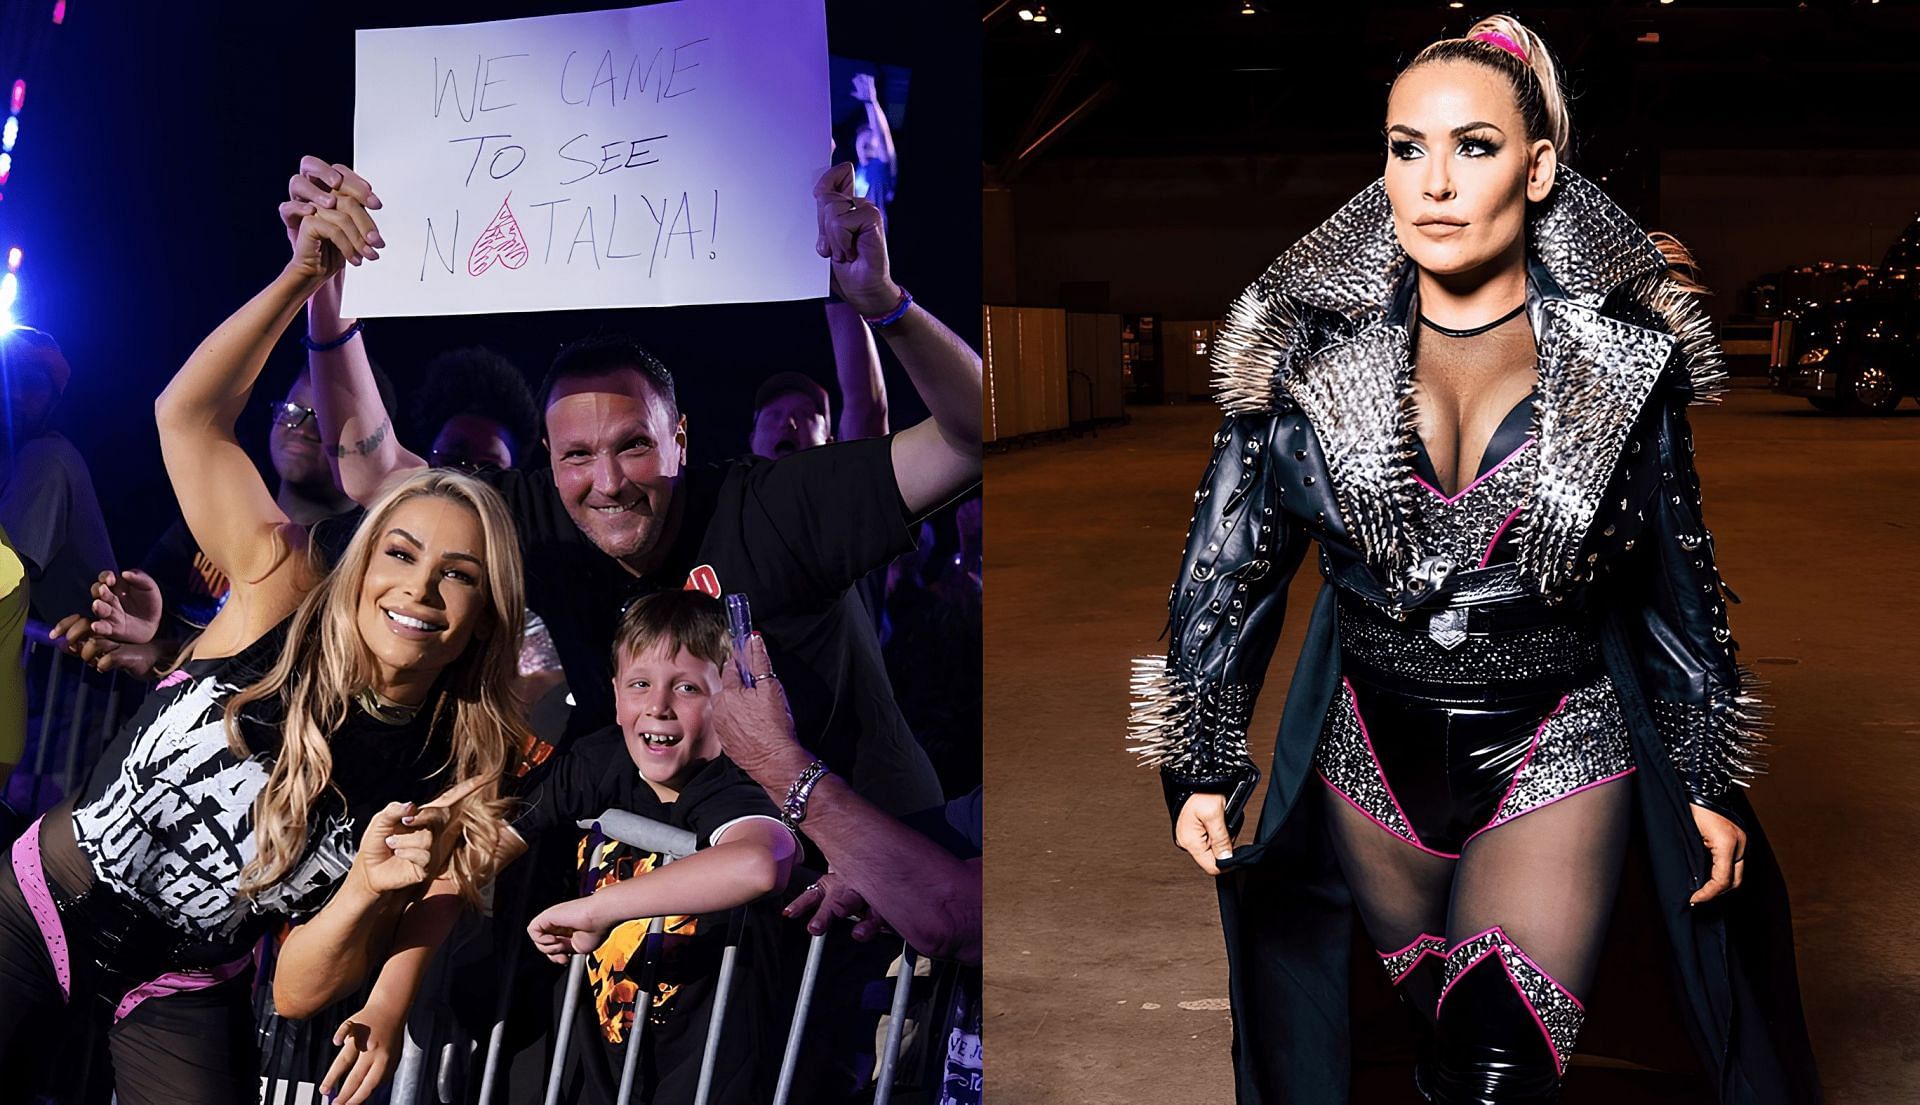 Natalya boasts extensive experience as one of WWE